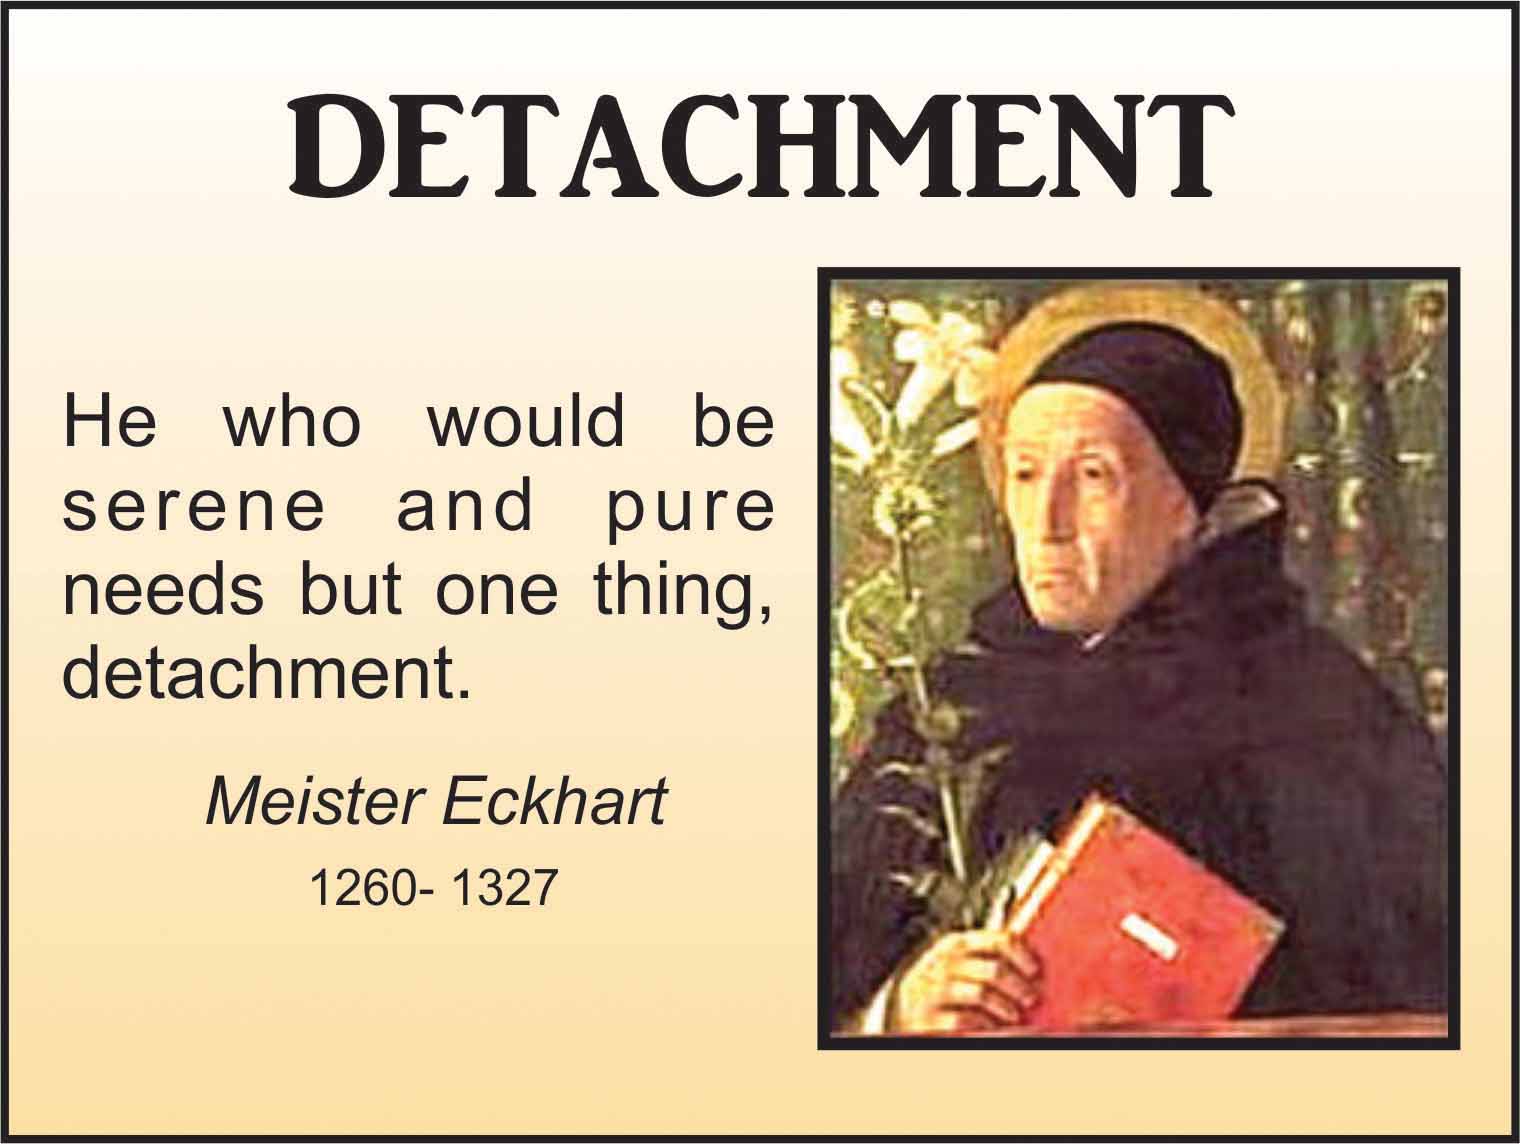 Happiness and detachment